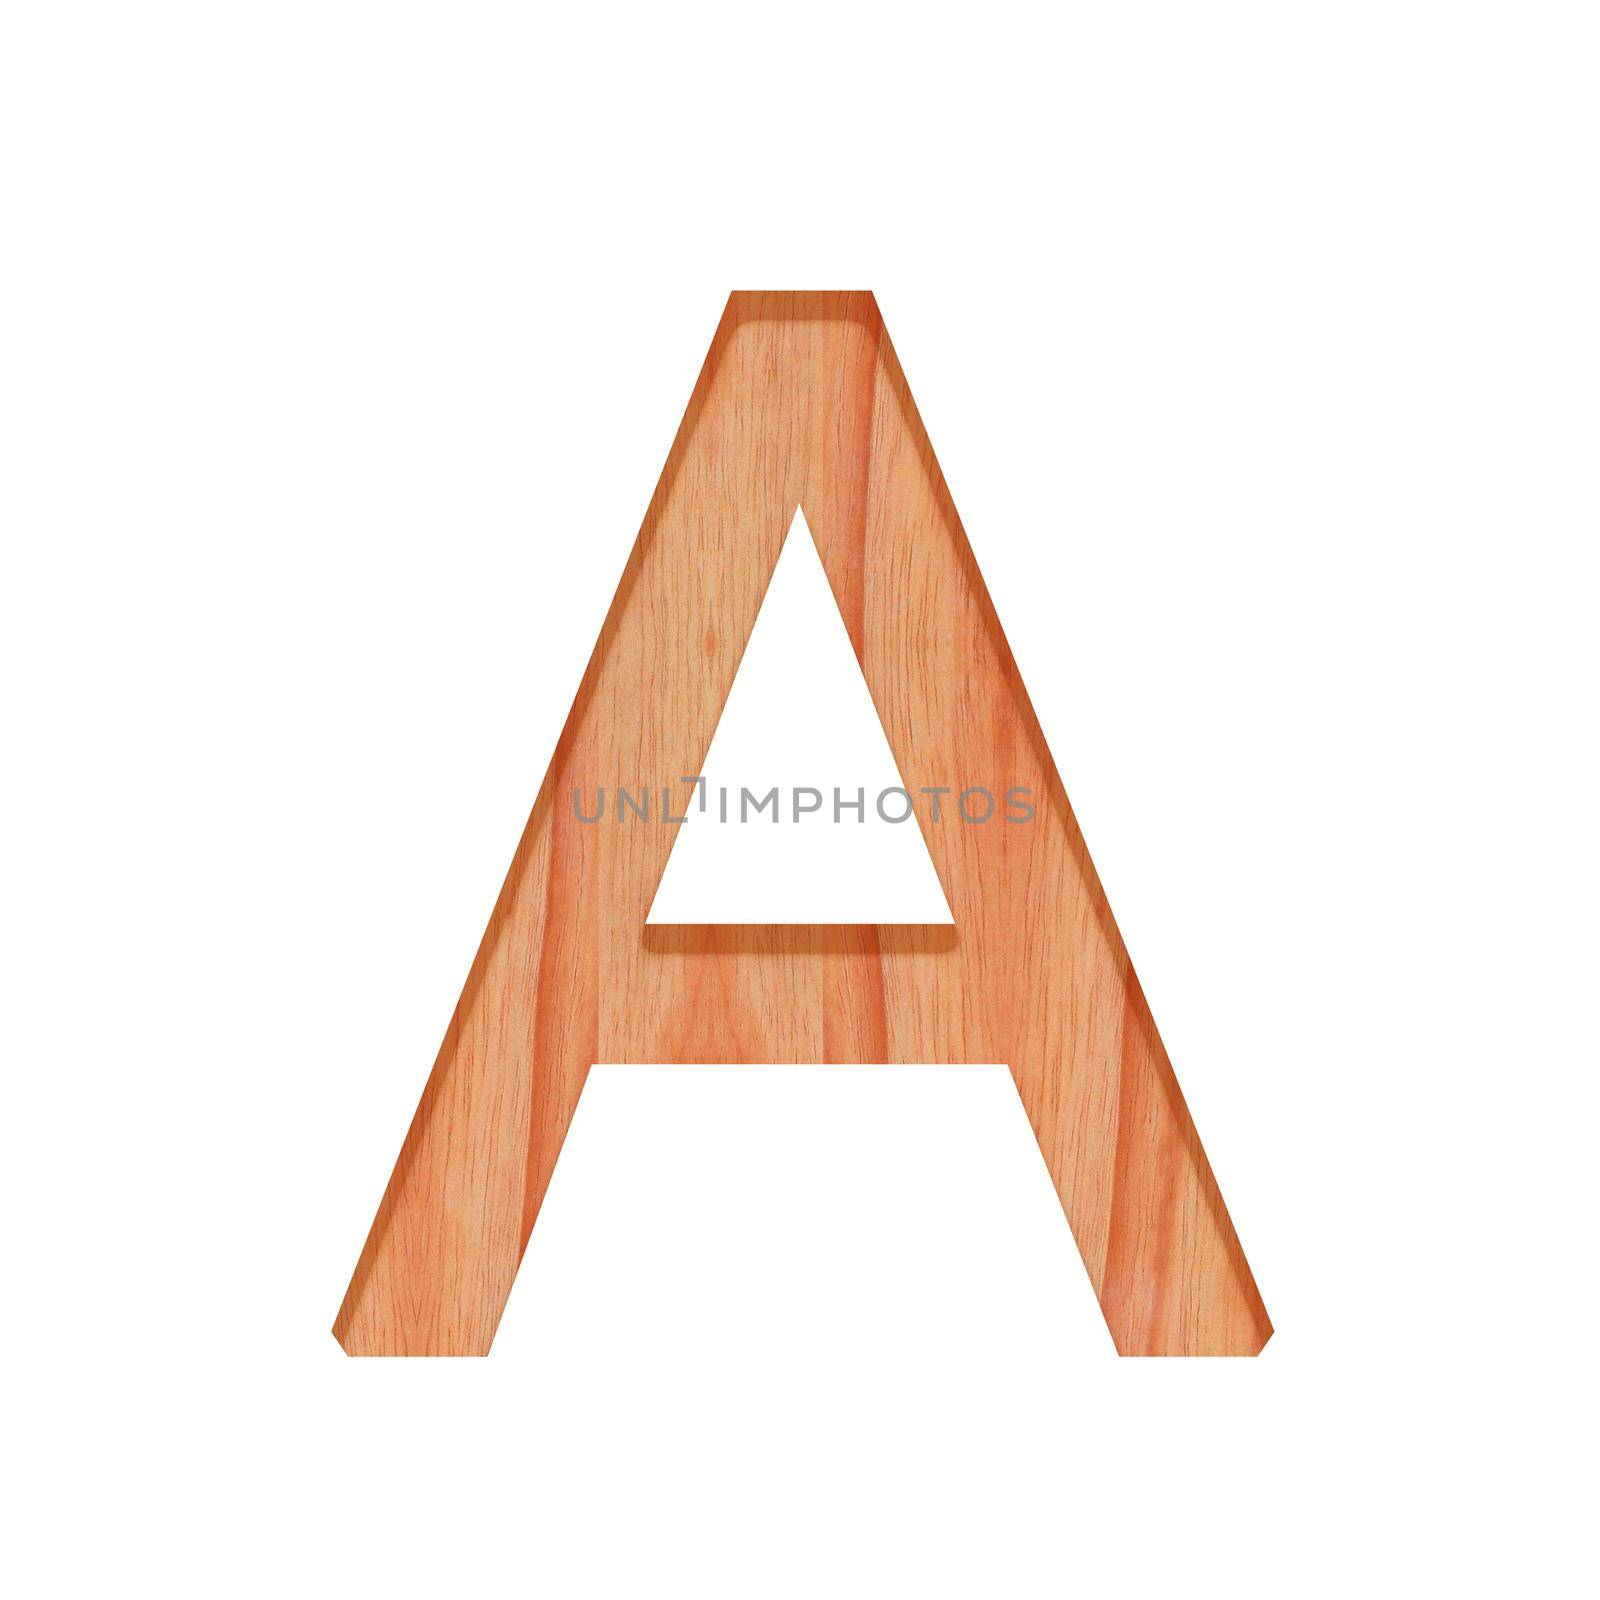 wooden vintage alphabet letter pattern beautiful 3d isolated on white background, capital letter A by pramot